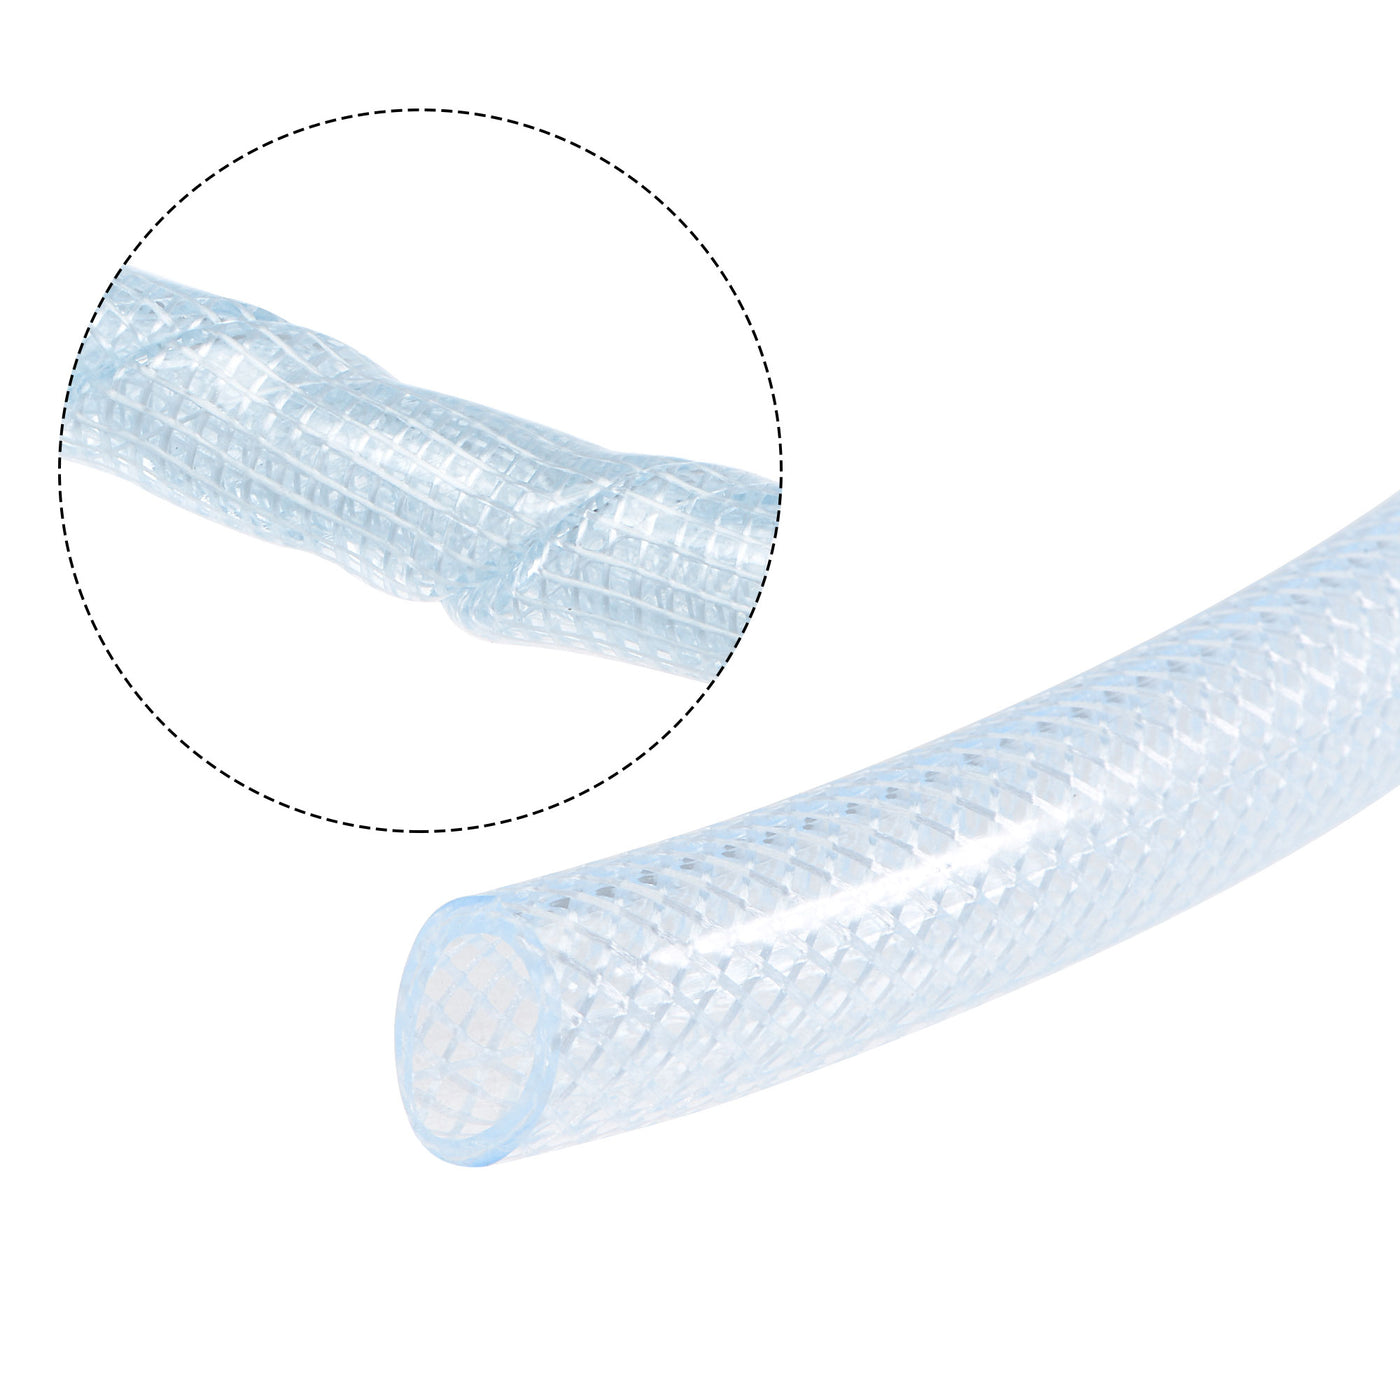 Uxcell Uxcell Braided PVC Tubing, 1/2"(13mm) ID 11/16"(17mm) OD 26ft(8m) Flexible Clear Water Hose